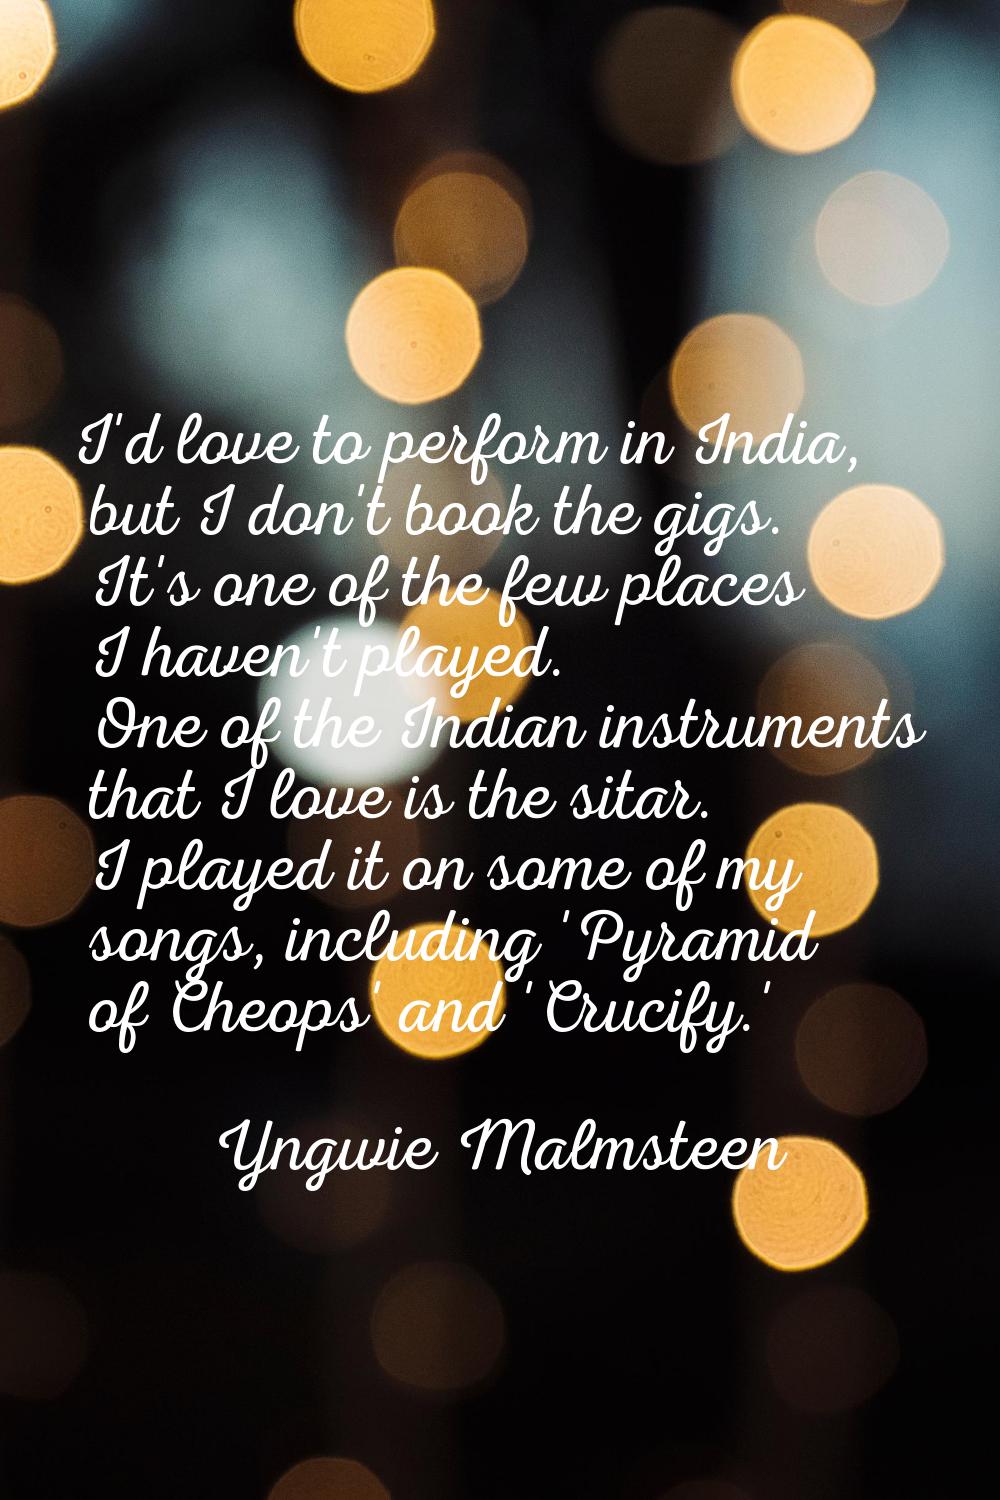 I'd love to perform in India, but I don't book the gigs. It's one of the few places I haven't playe